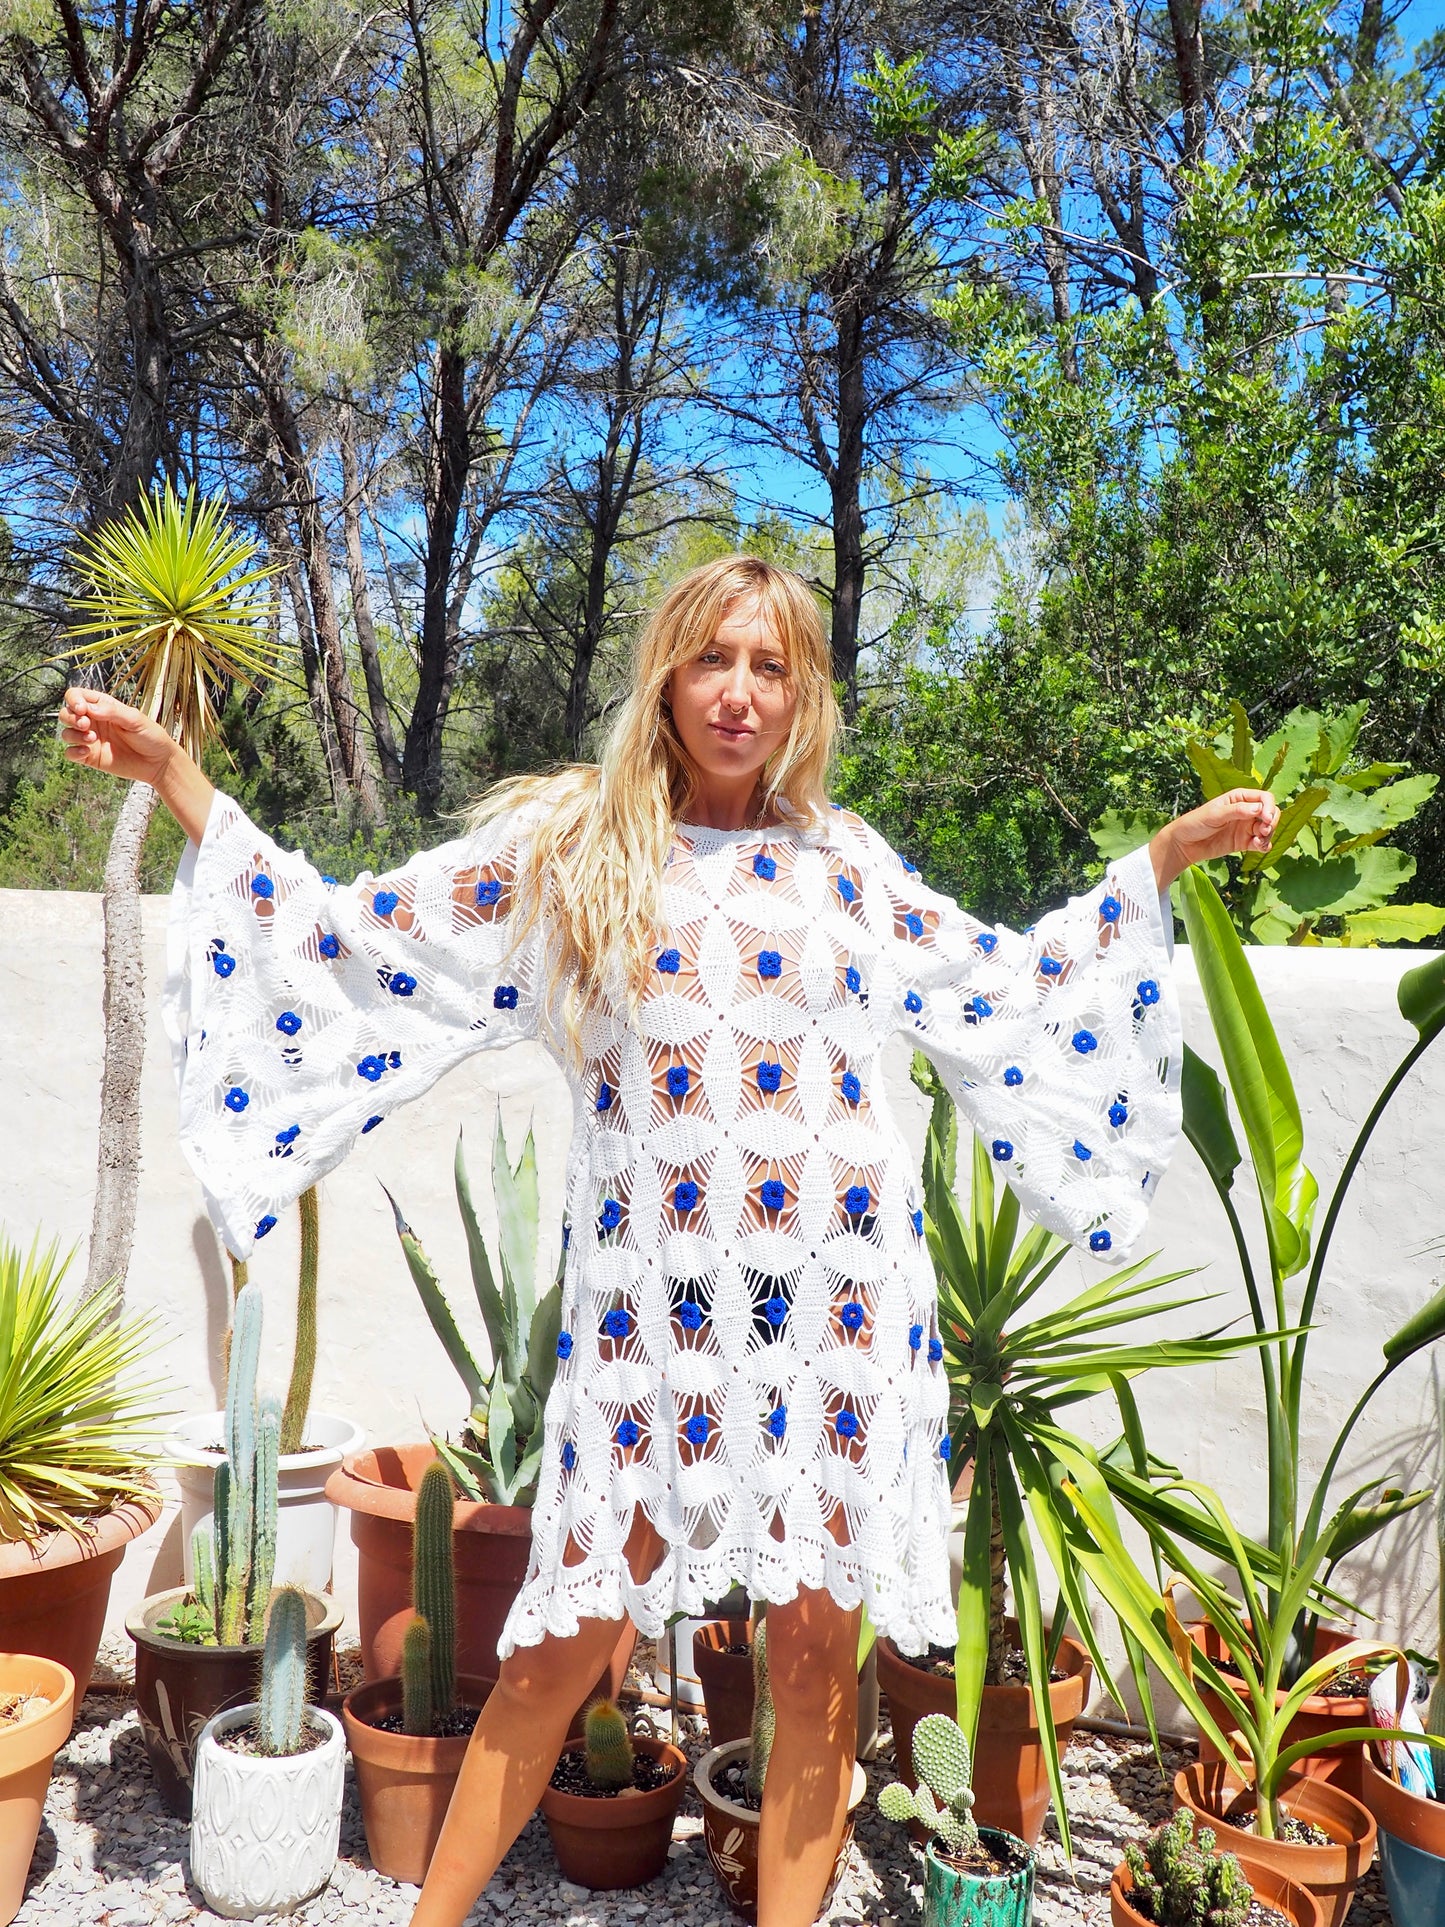 Amazing handmade vintage crochet textiles up-cycled bell sleeve dress with blue flower details by Vagabond Ibiza